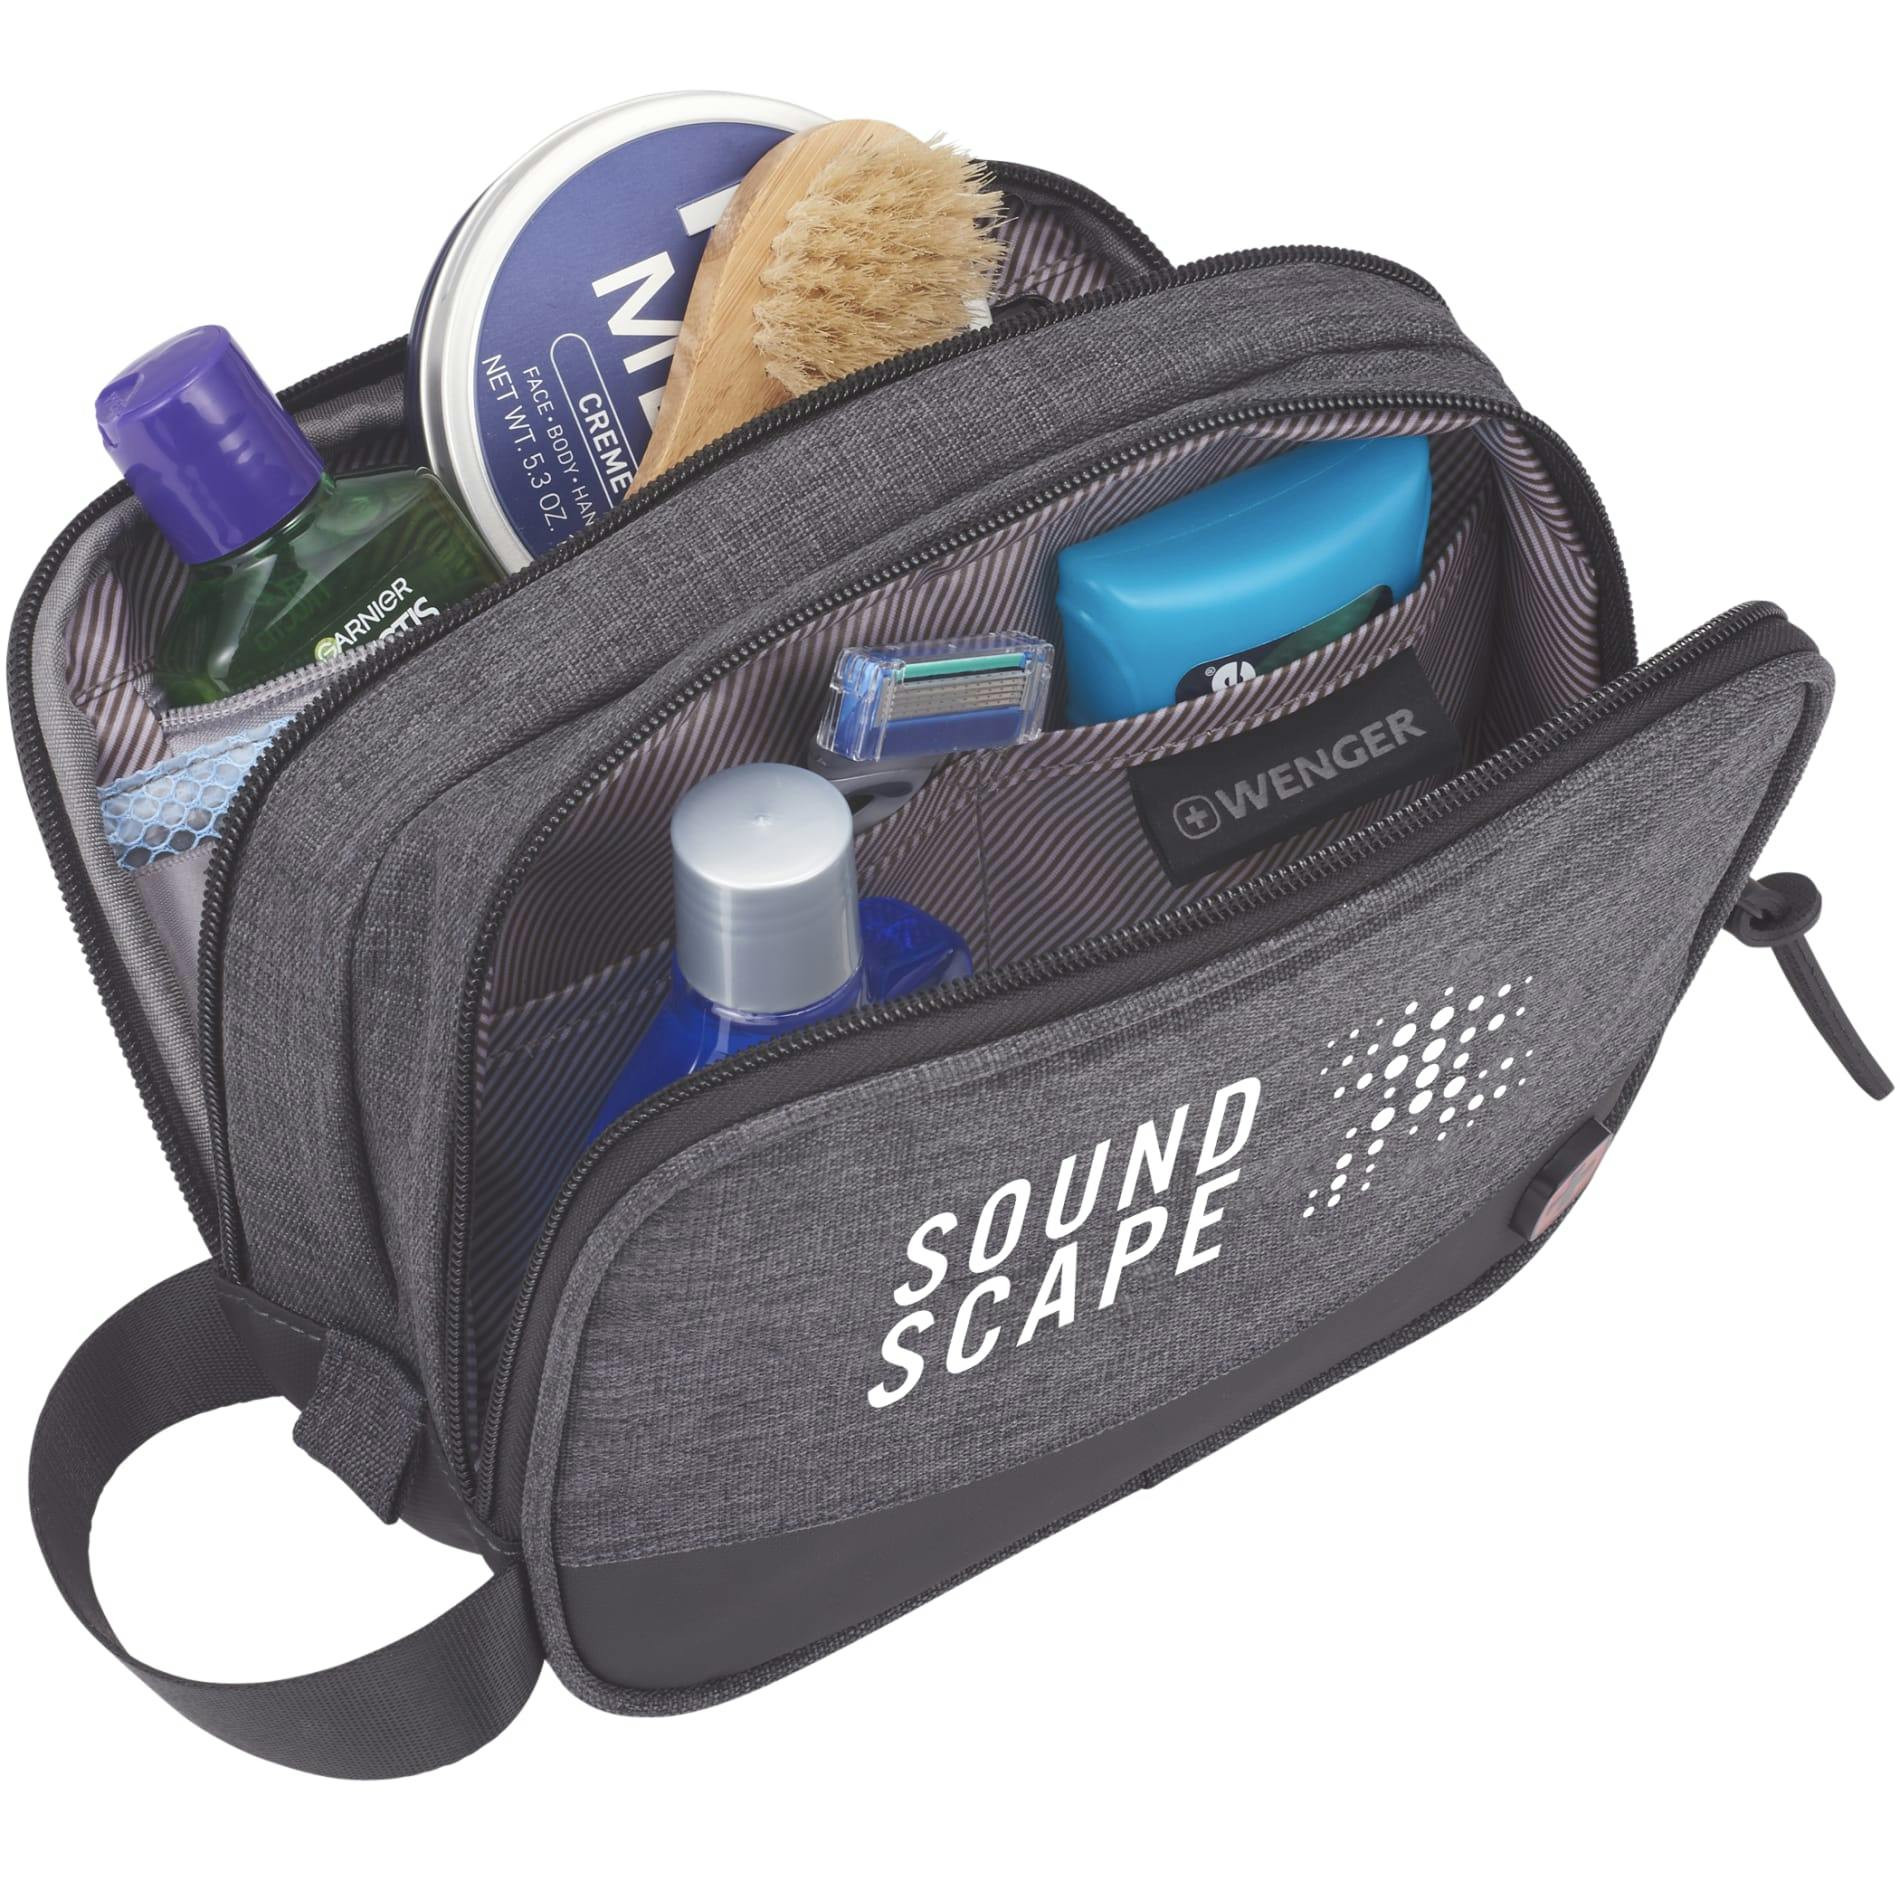 Wenger RPET Dual Compartment Dopp Kit - additional Image 1